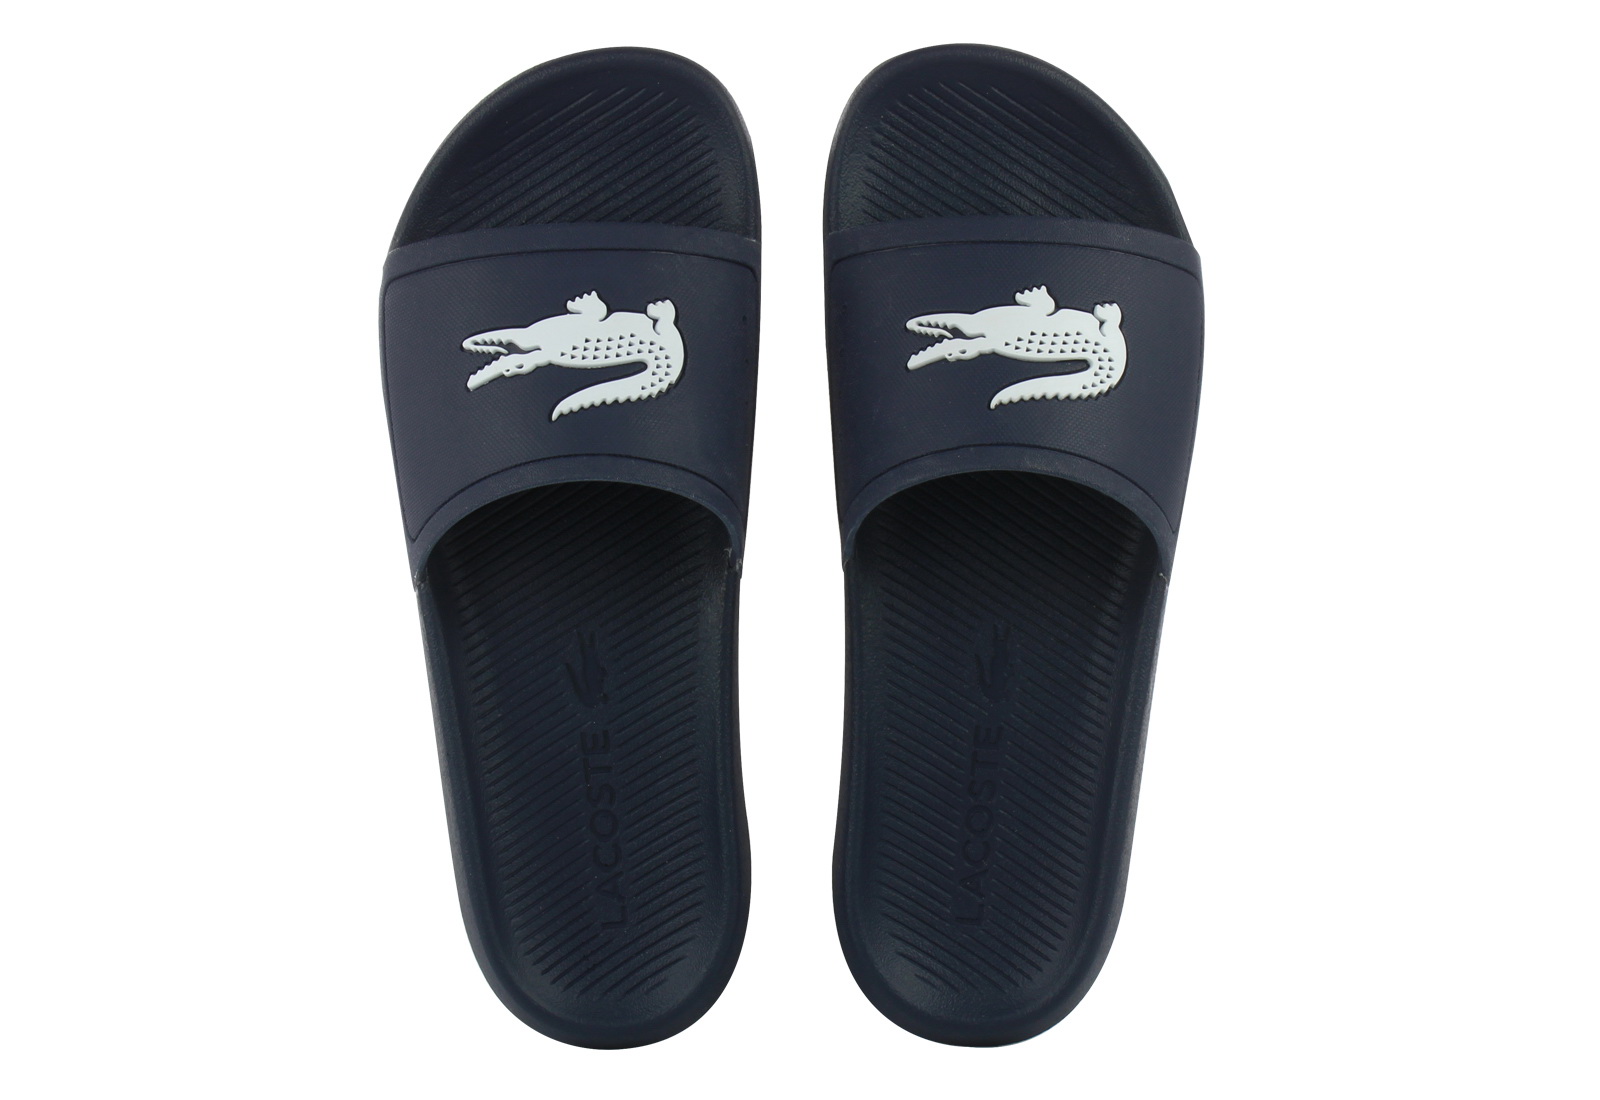 lacoste slippers black